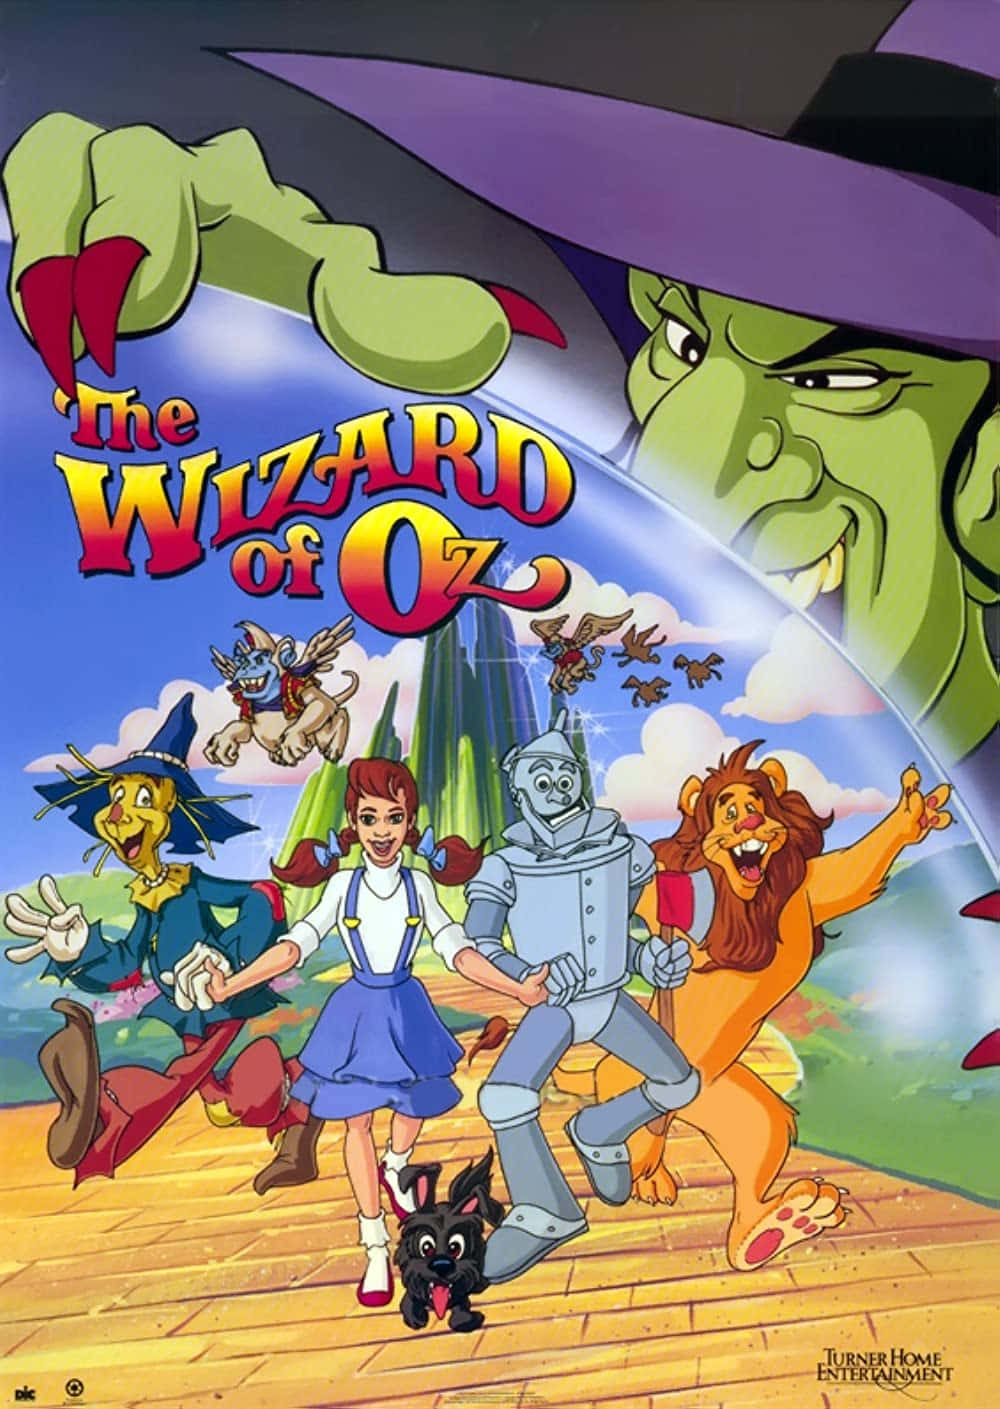 Courage, Friendship,&Adventure - Journey down the yellow brick road with the Wizard of Oz crew